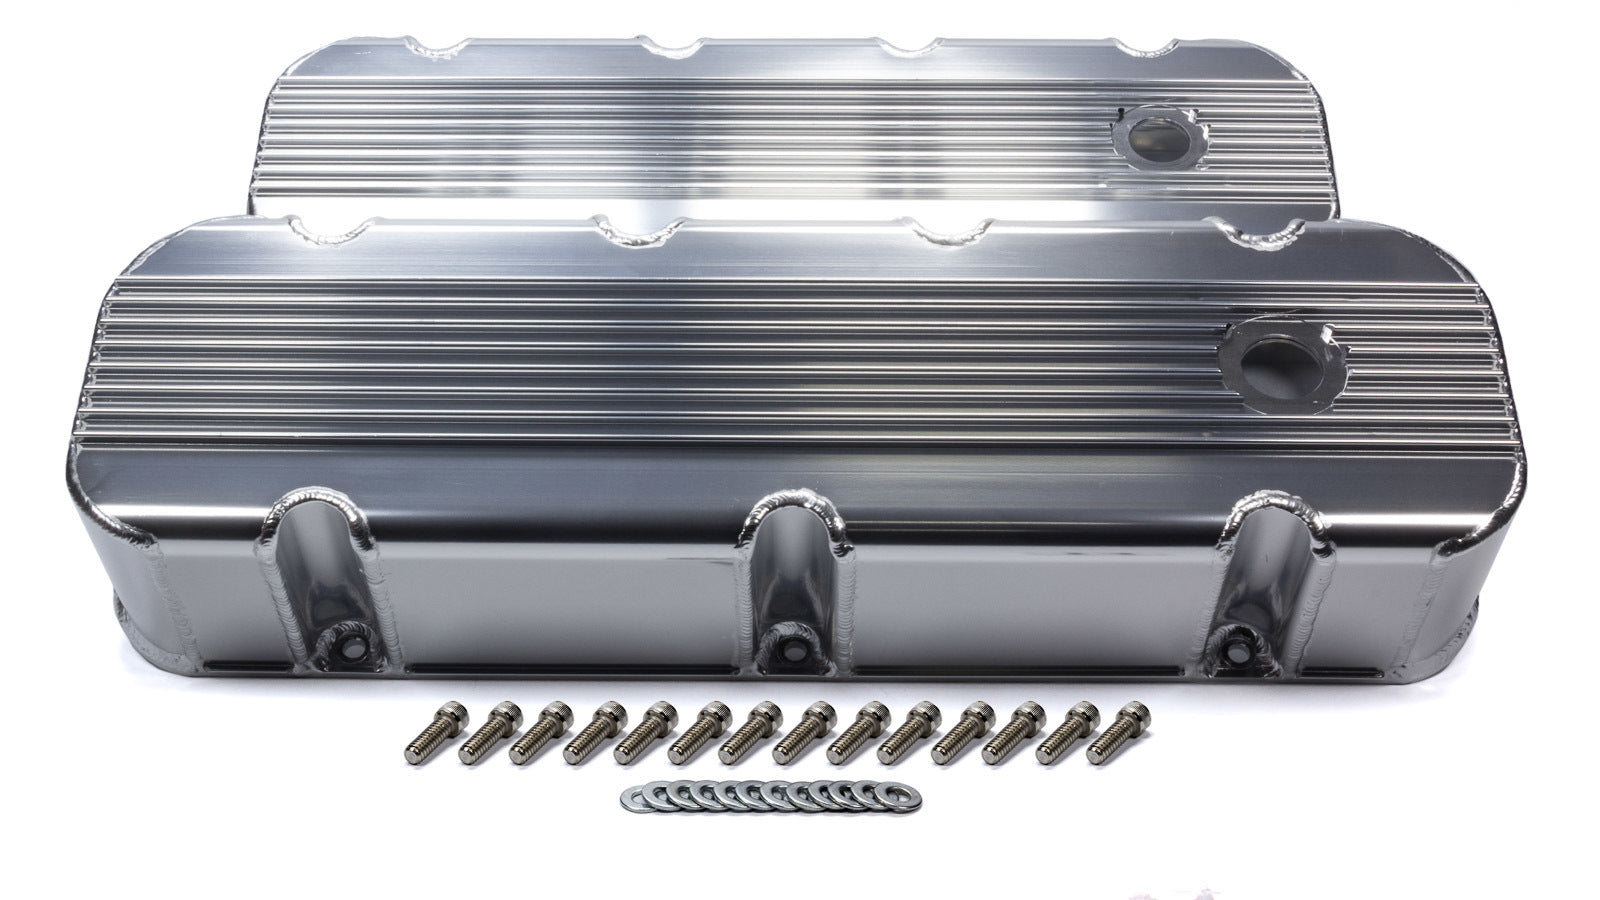 MR Gasket BBC Cast Alm Valve Cover Set Finned Style Pol. Engine Covers, Pans and Dress-Up Components Valve Covers main image